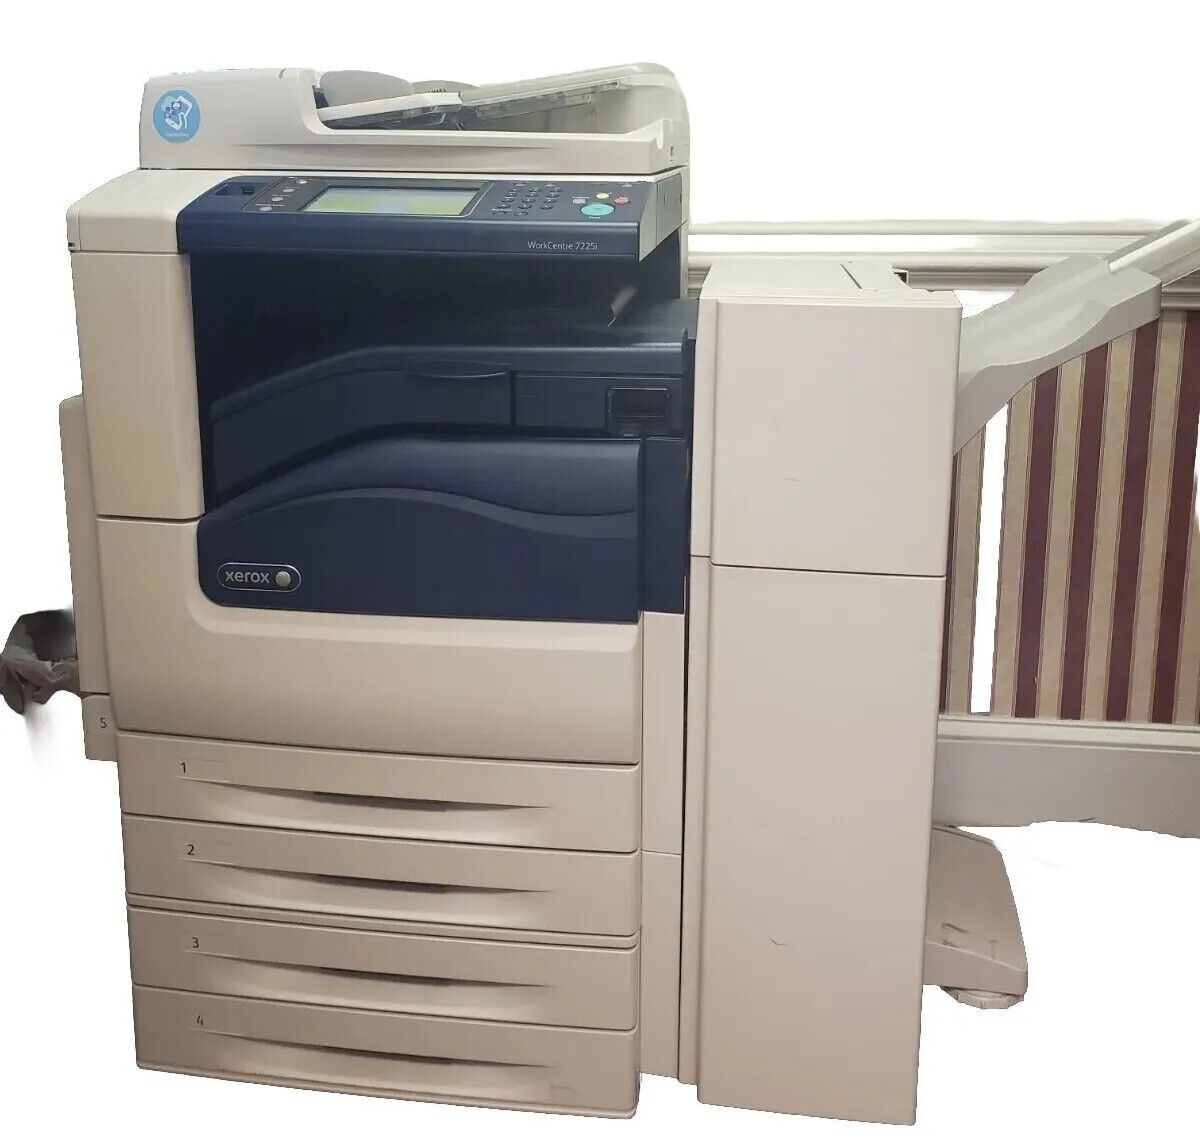 Xerox Workcentre 7225 Copier /Printer/ Scanner - free delivery provided